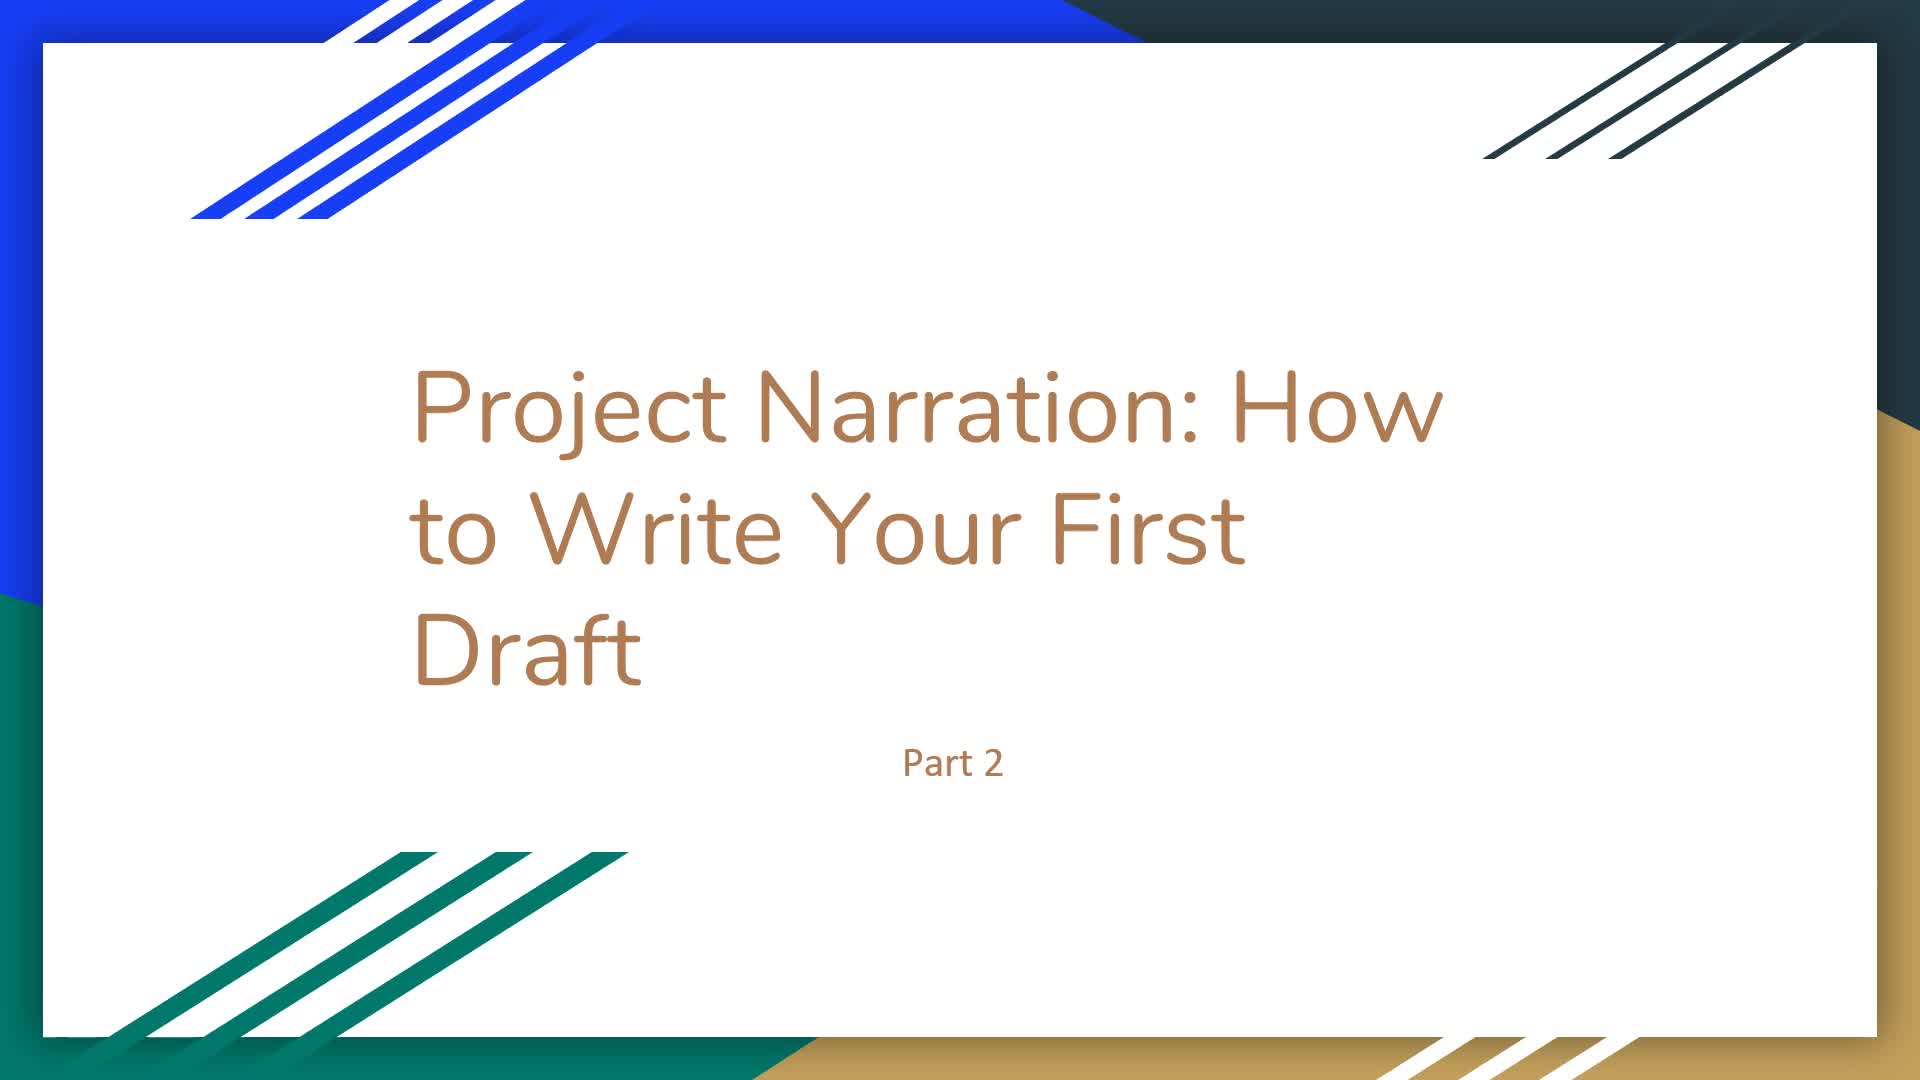 Project Narration: Writing Your First Draft Part 2